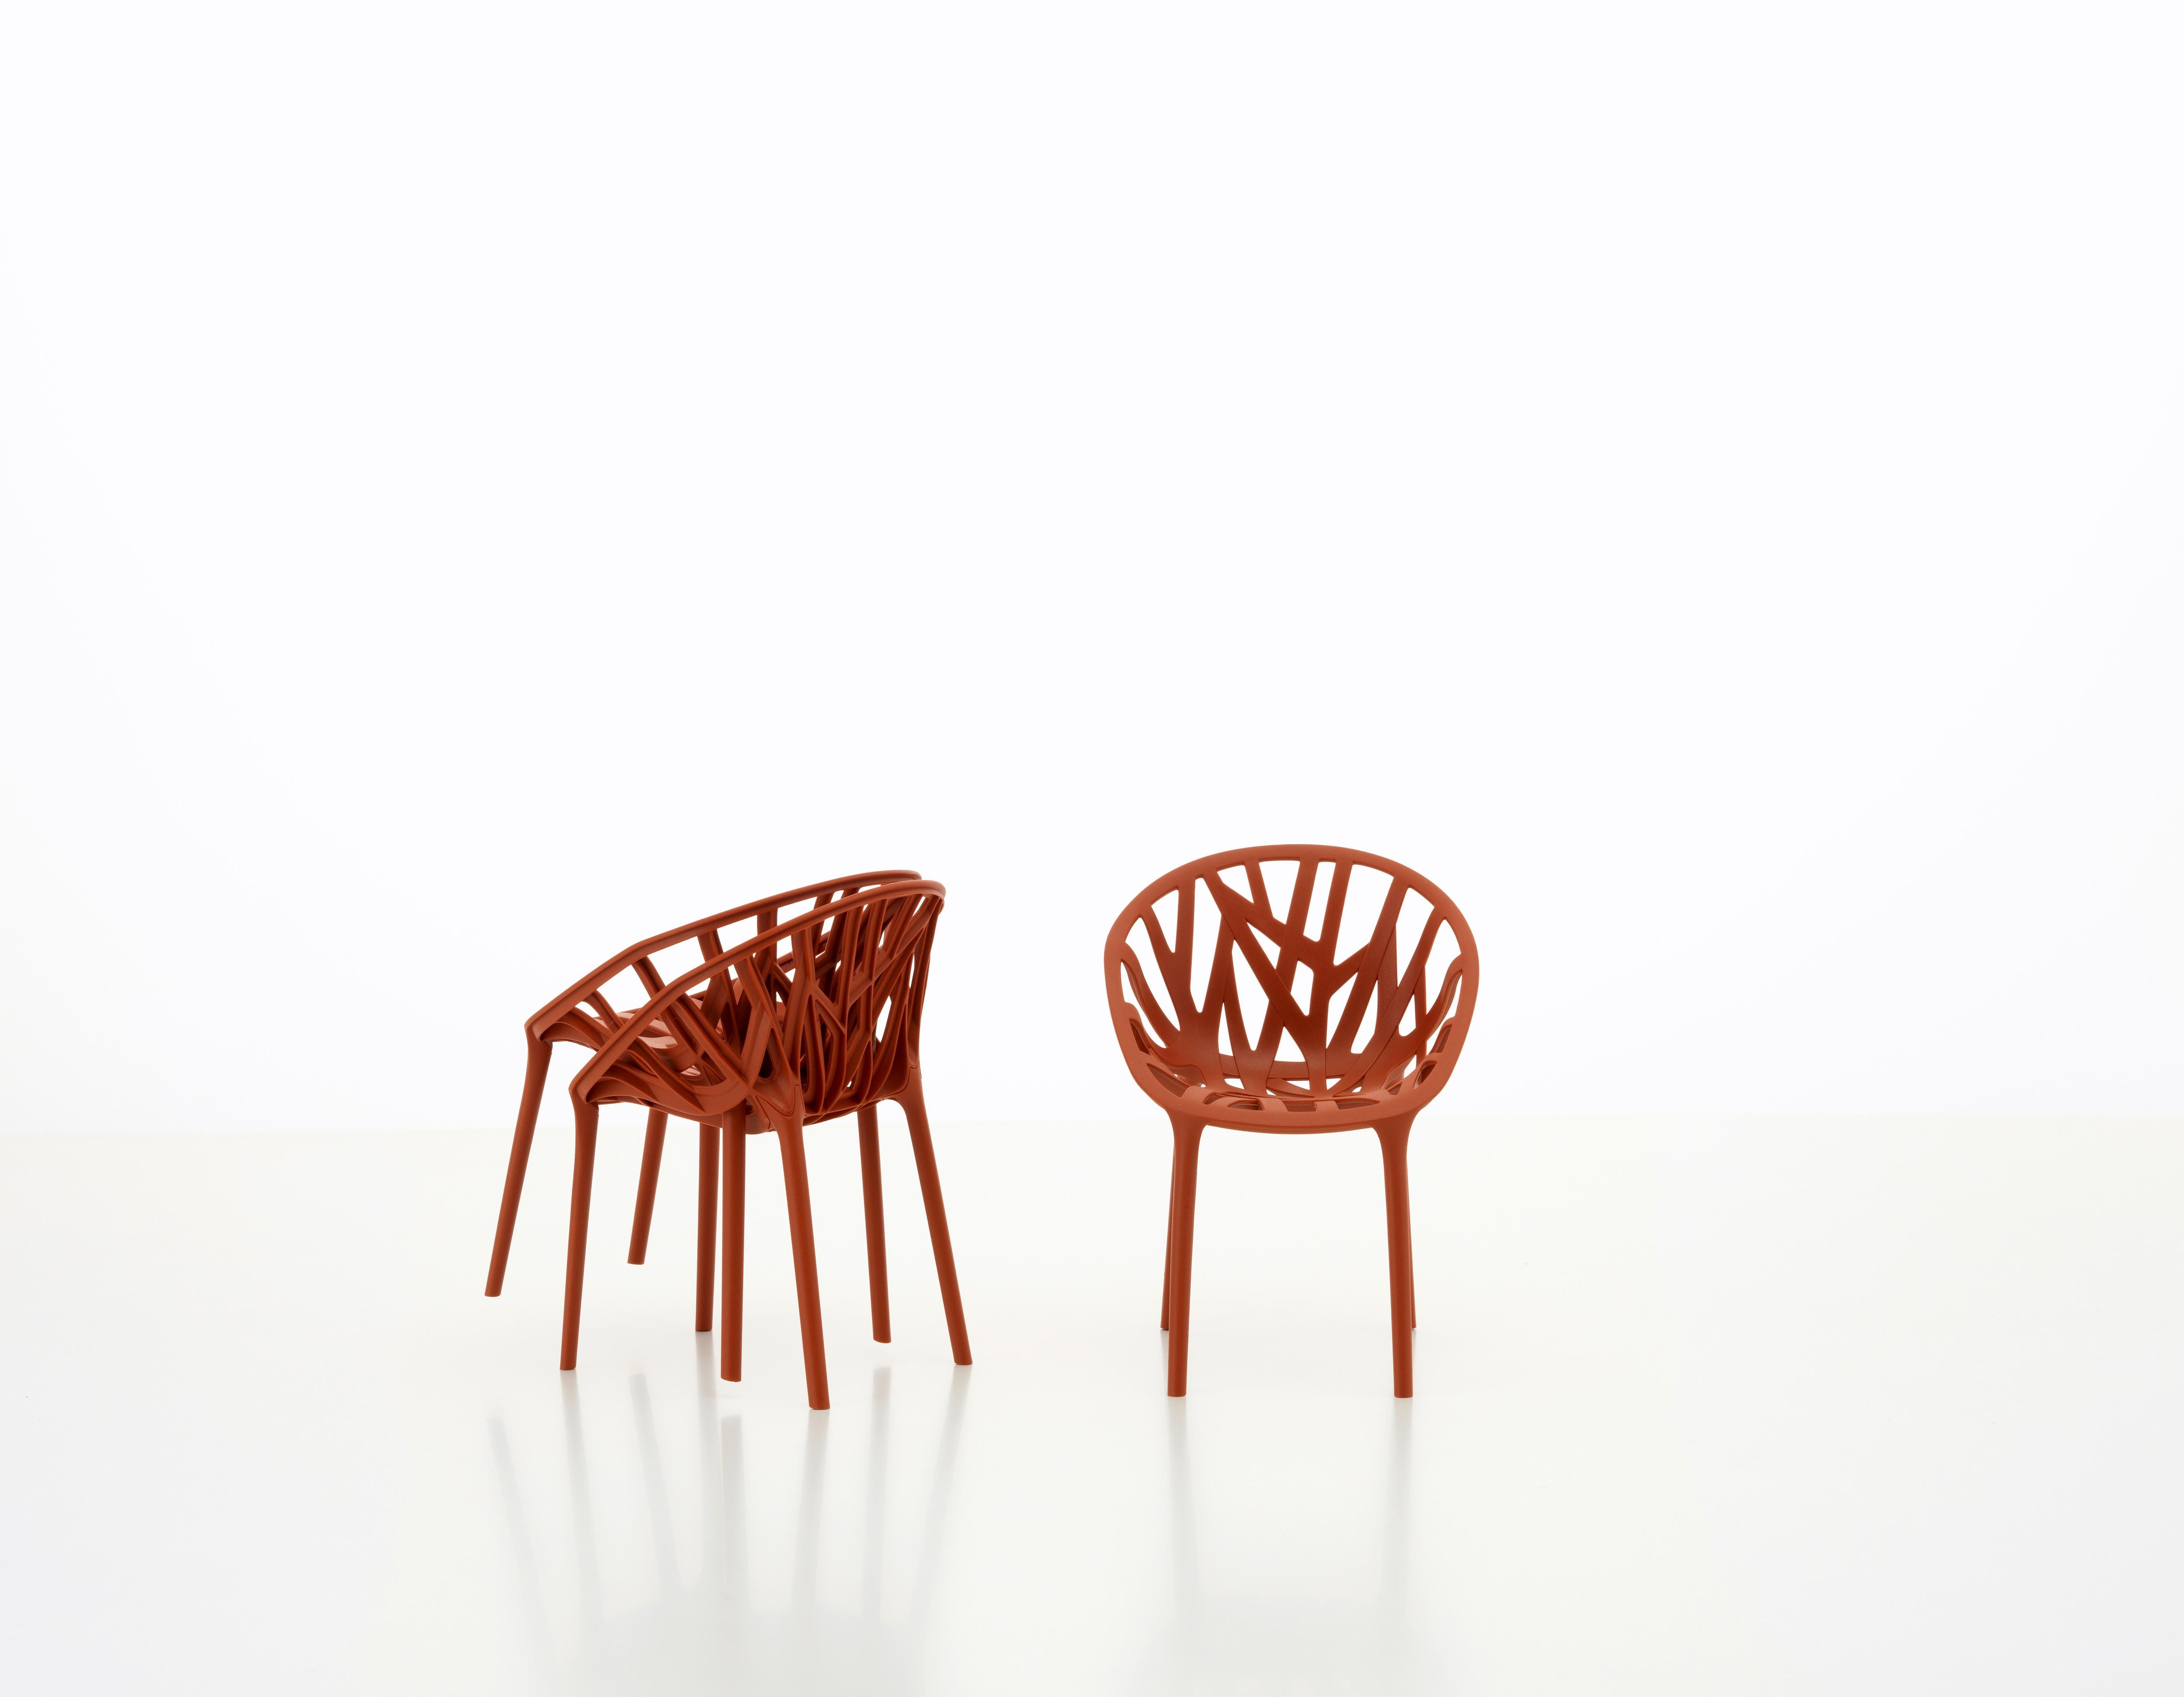 These products are only available in the United States.

Vitra Vegetal set of three miniature chair in brick by Ronan & Erwan Bouroullec.

The Vegetal is an organically-shaped chair that is meant to look as if it had taken its shape naturally.